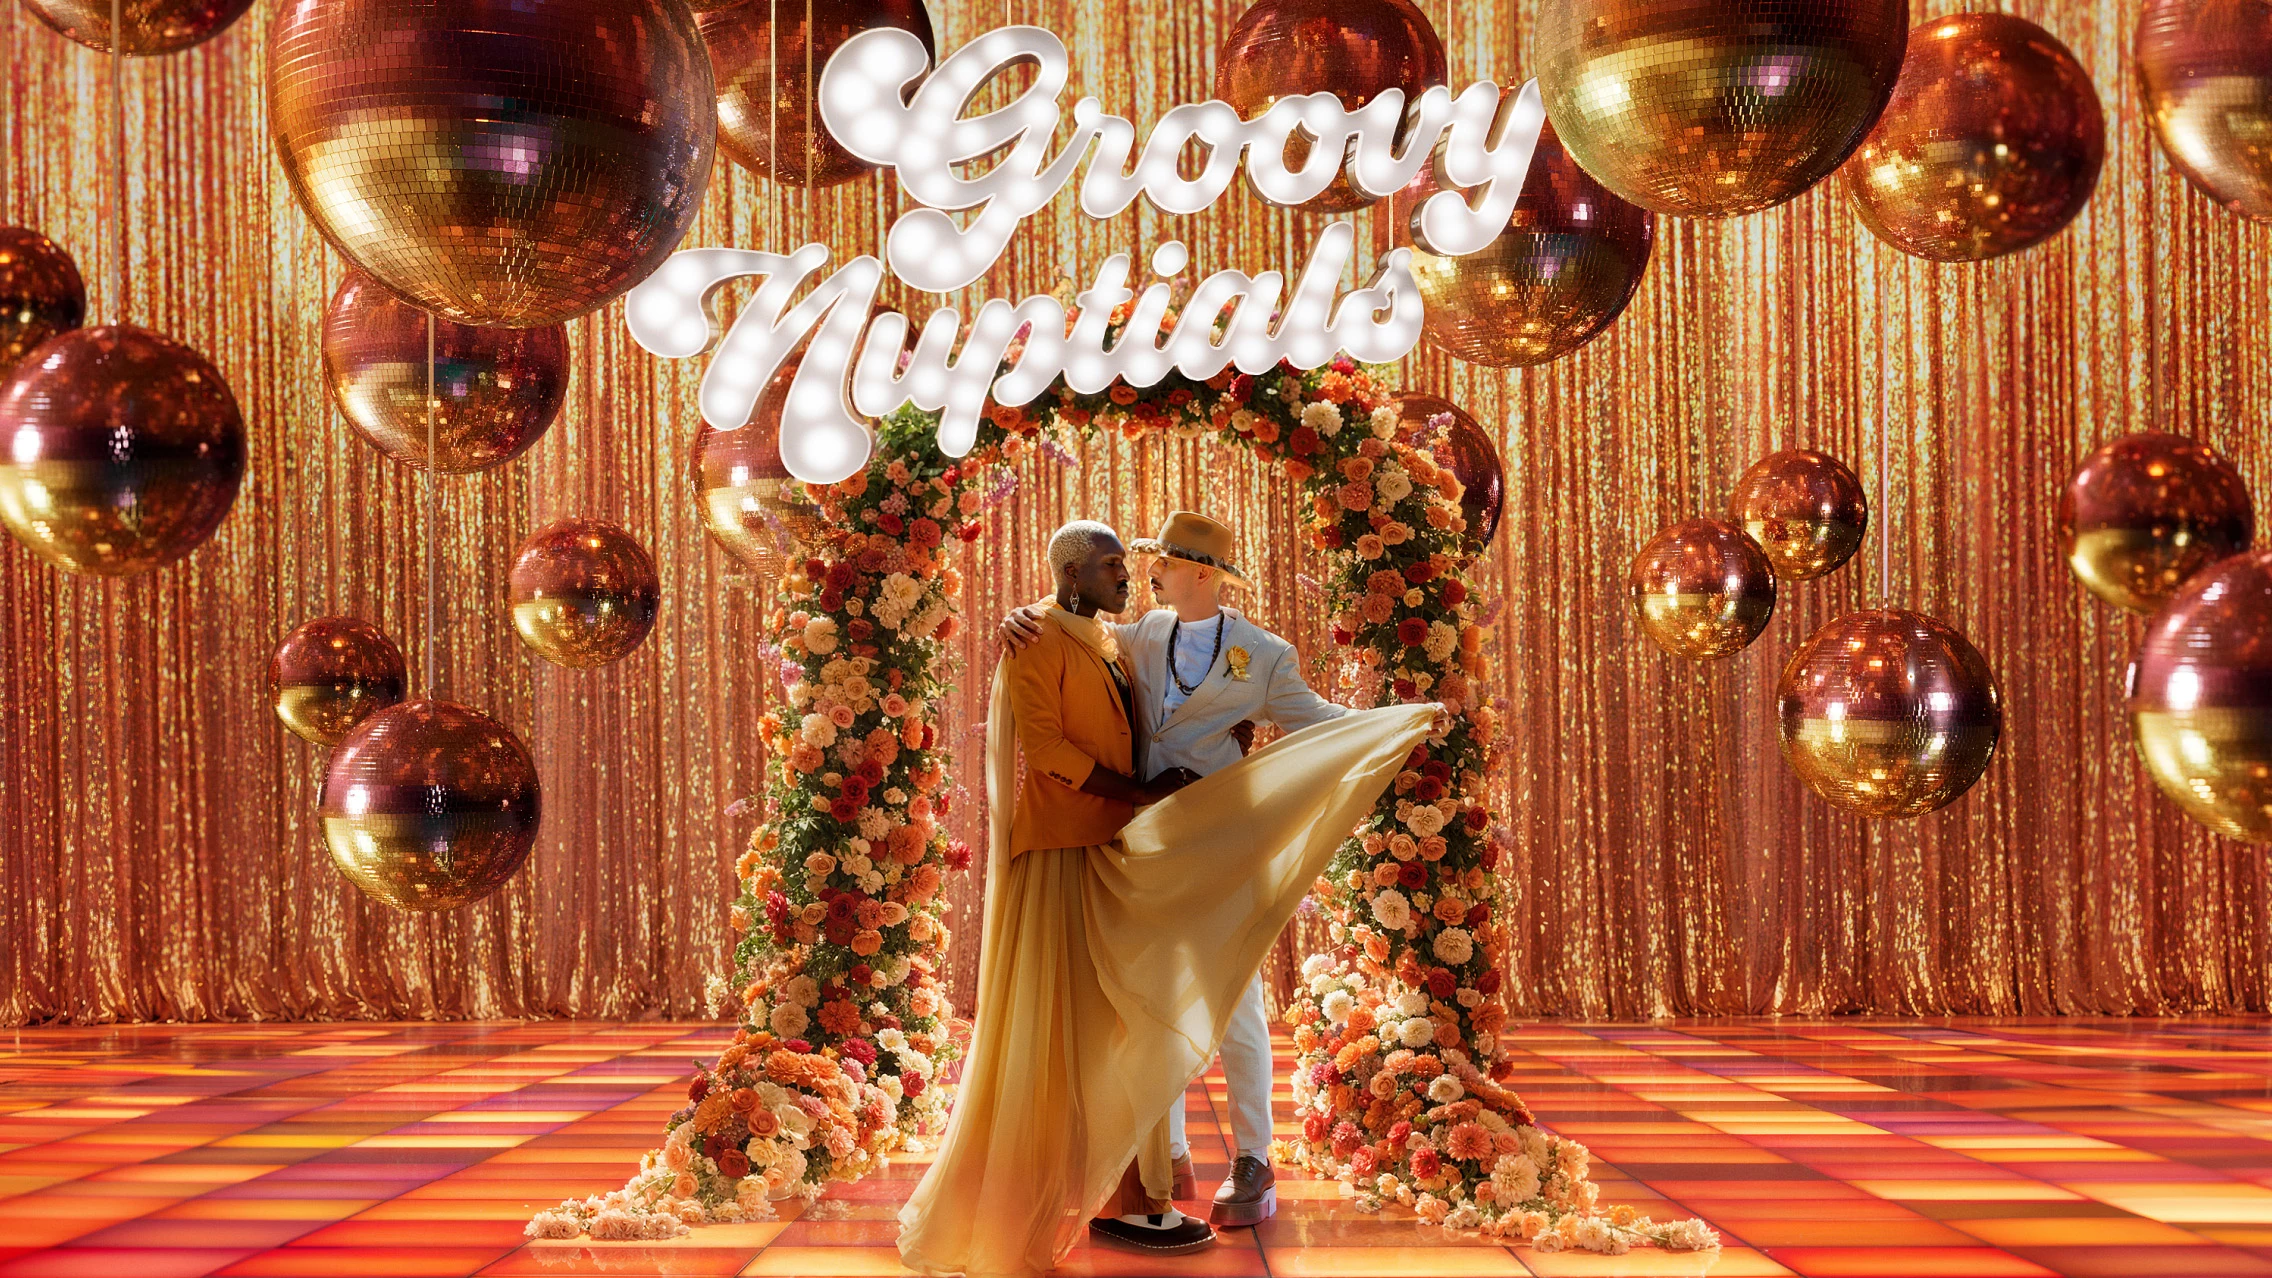 Male couple embracing under a floral arch standing atop a colorful tiled floor with sparkly rust-colored disco balls overhead. A white neon sign reads “Groovy nuptials” above their heads in cursive font.